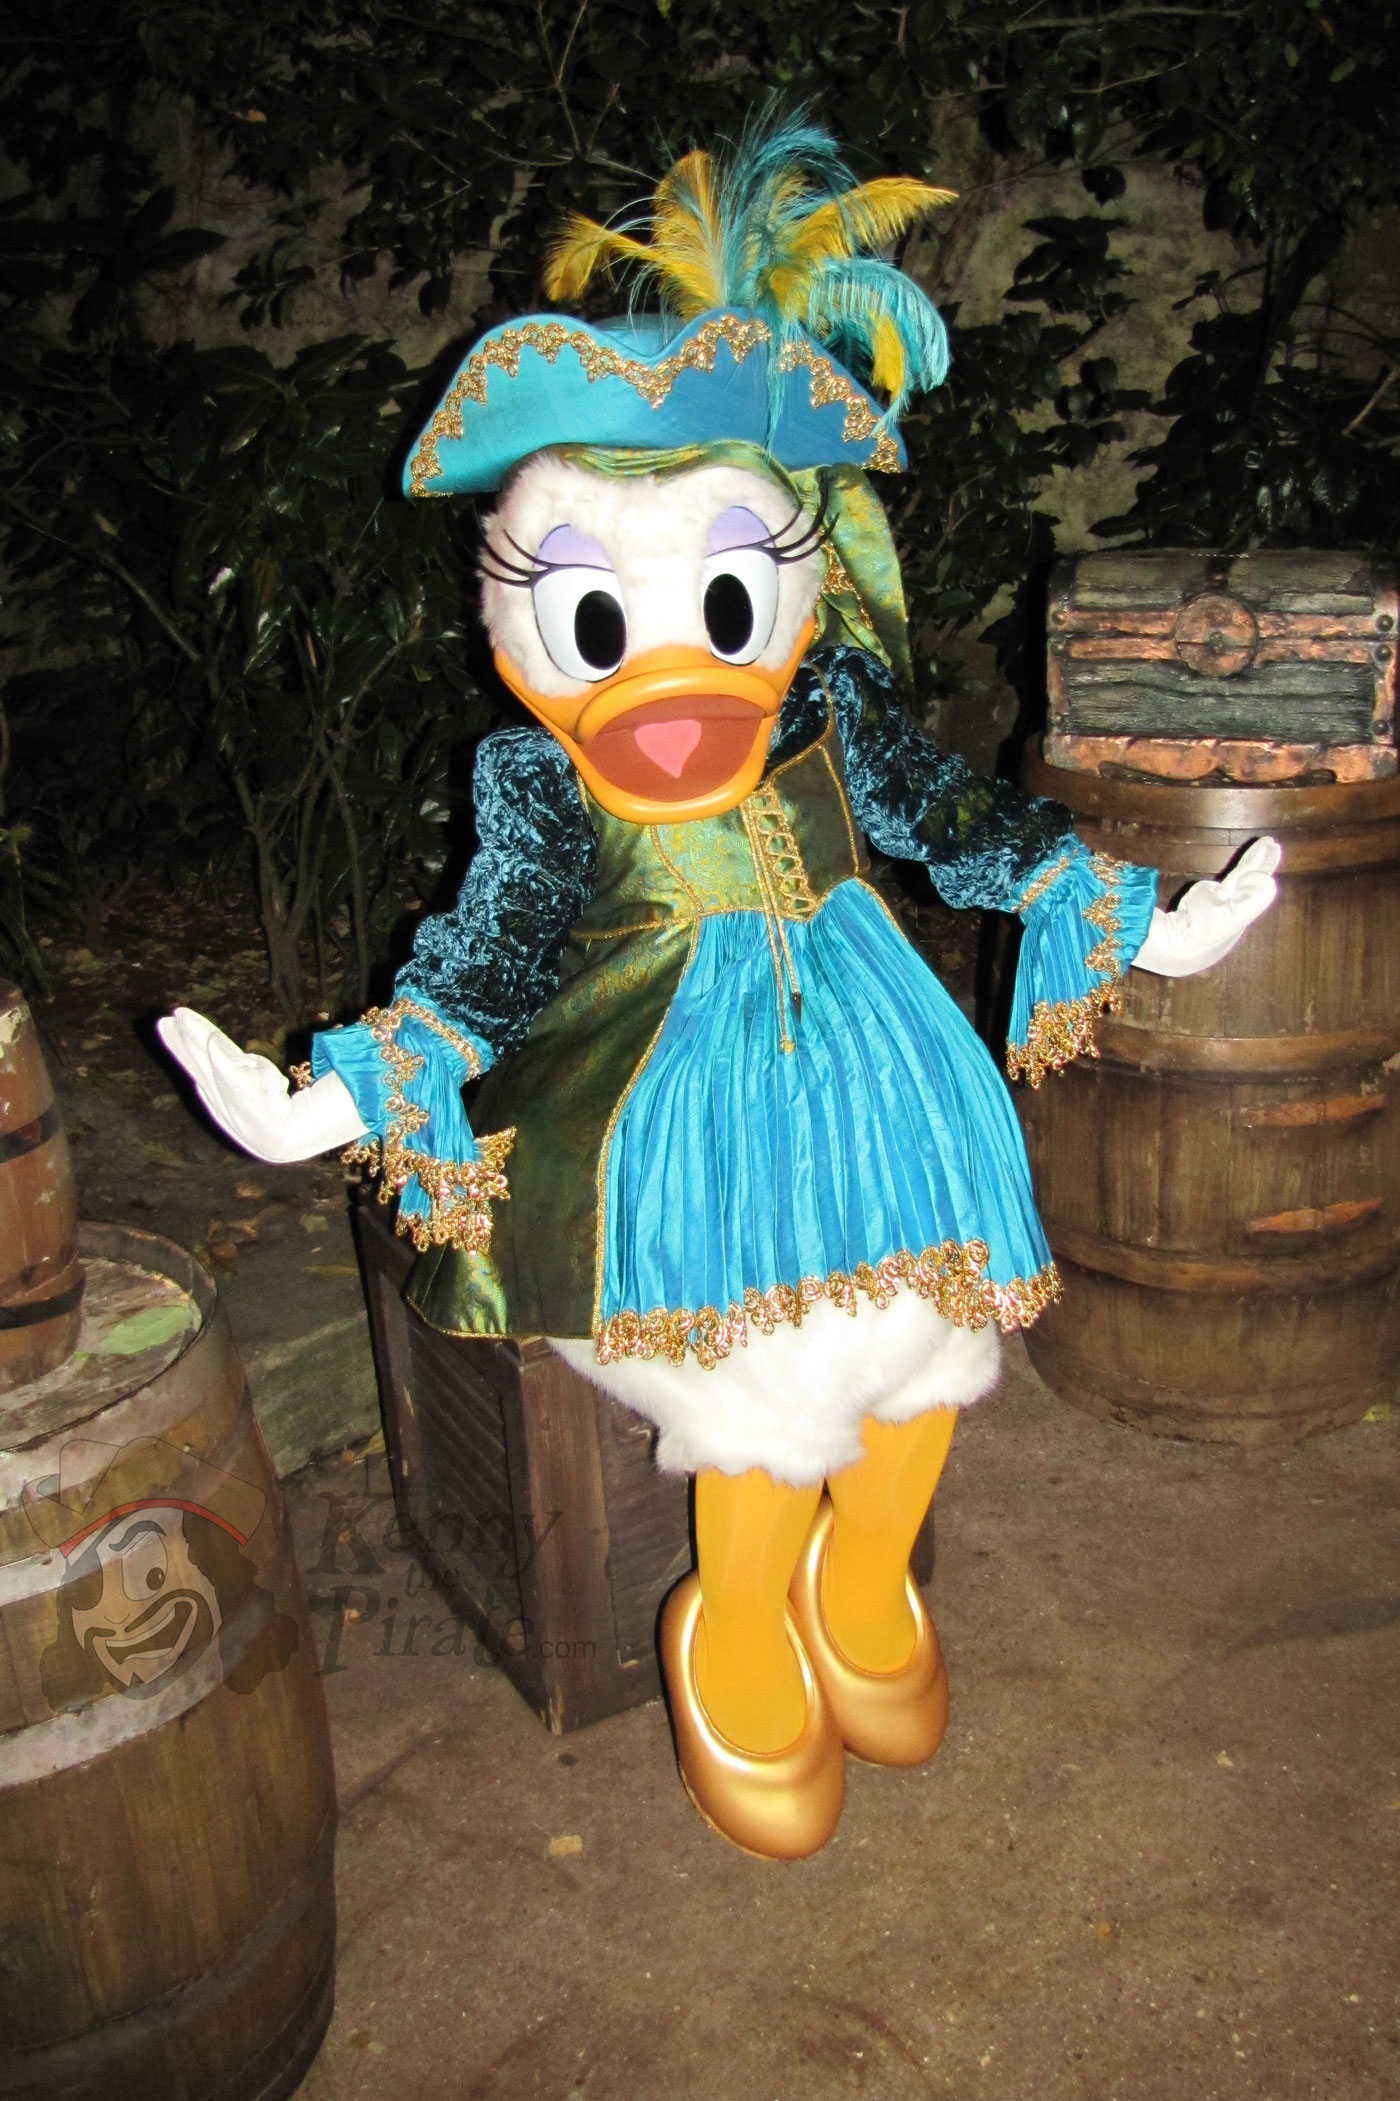 Daisy Duck at Disneyland Paris Halloween Party dressed as a Pirate